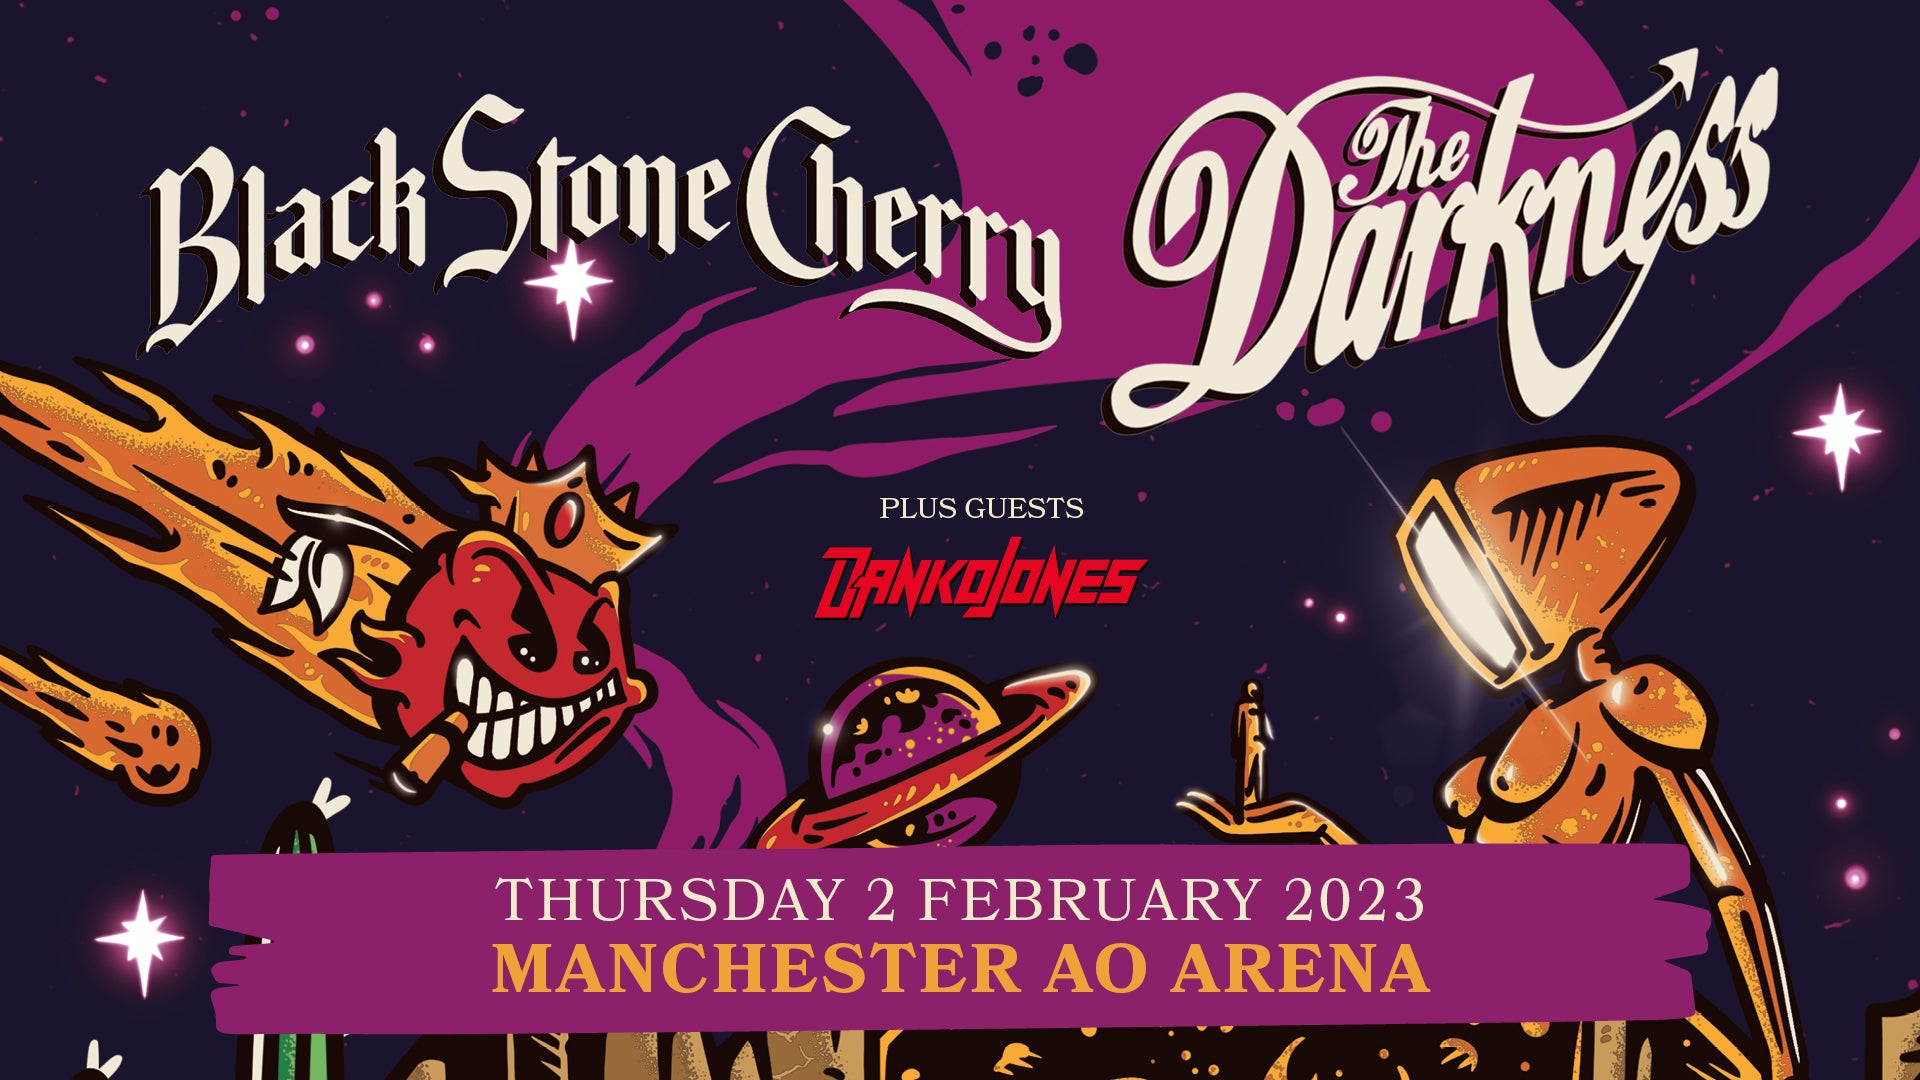 More Info for Black Stone Cherry & The Darkness